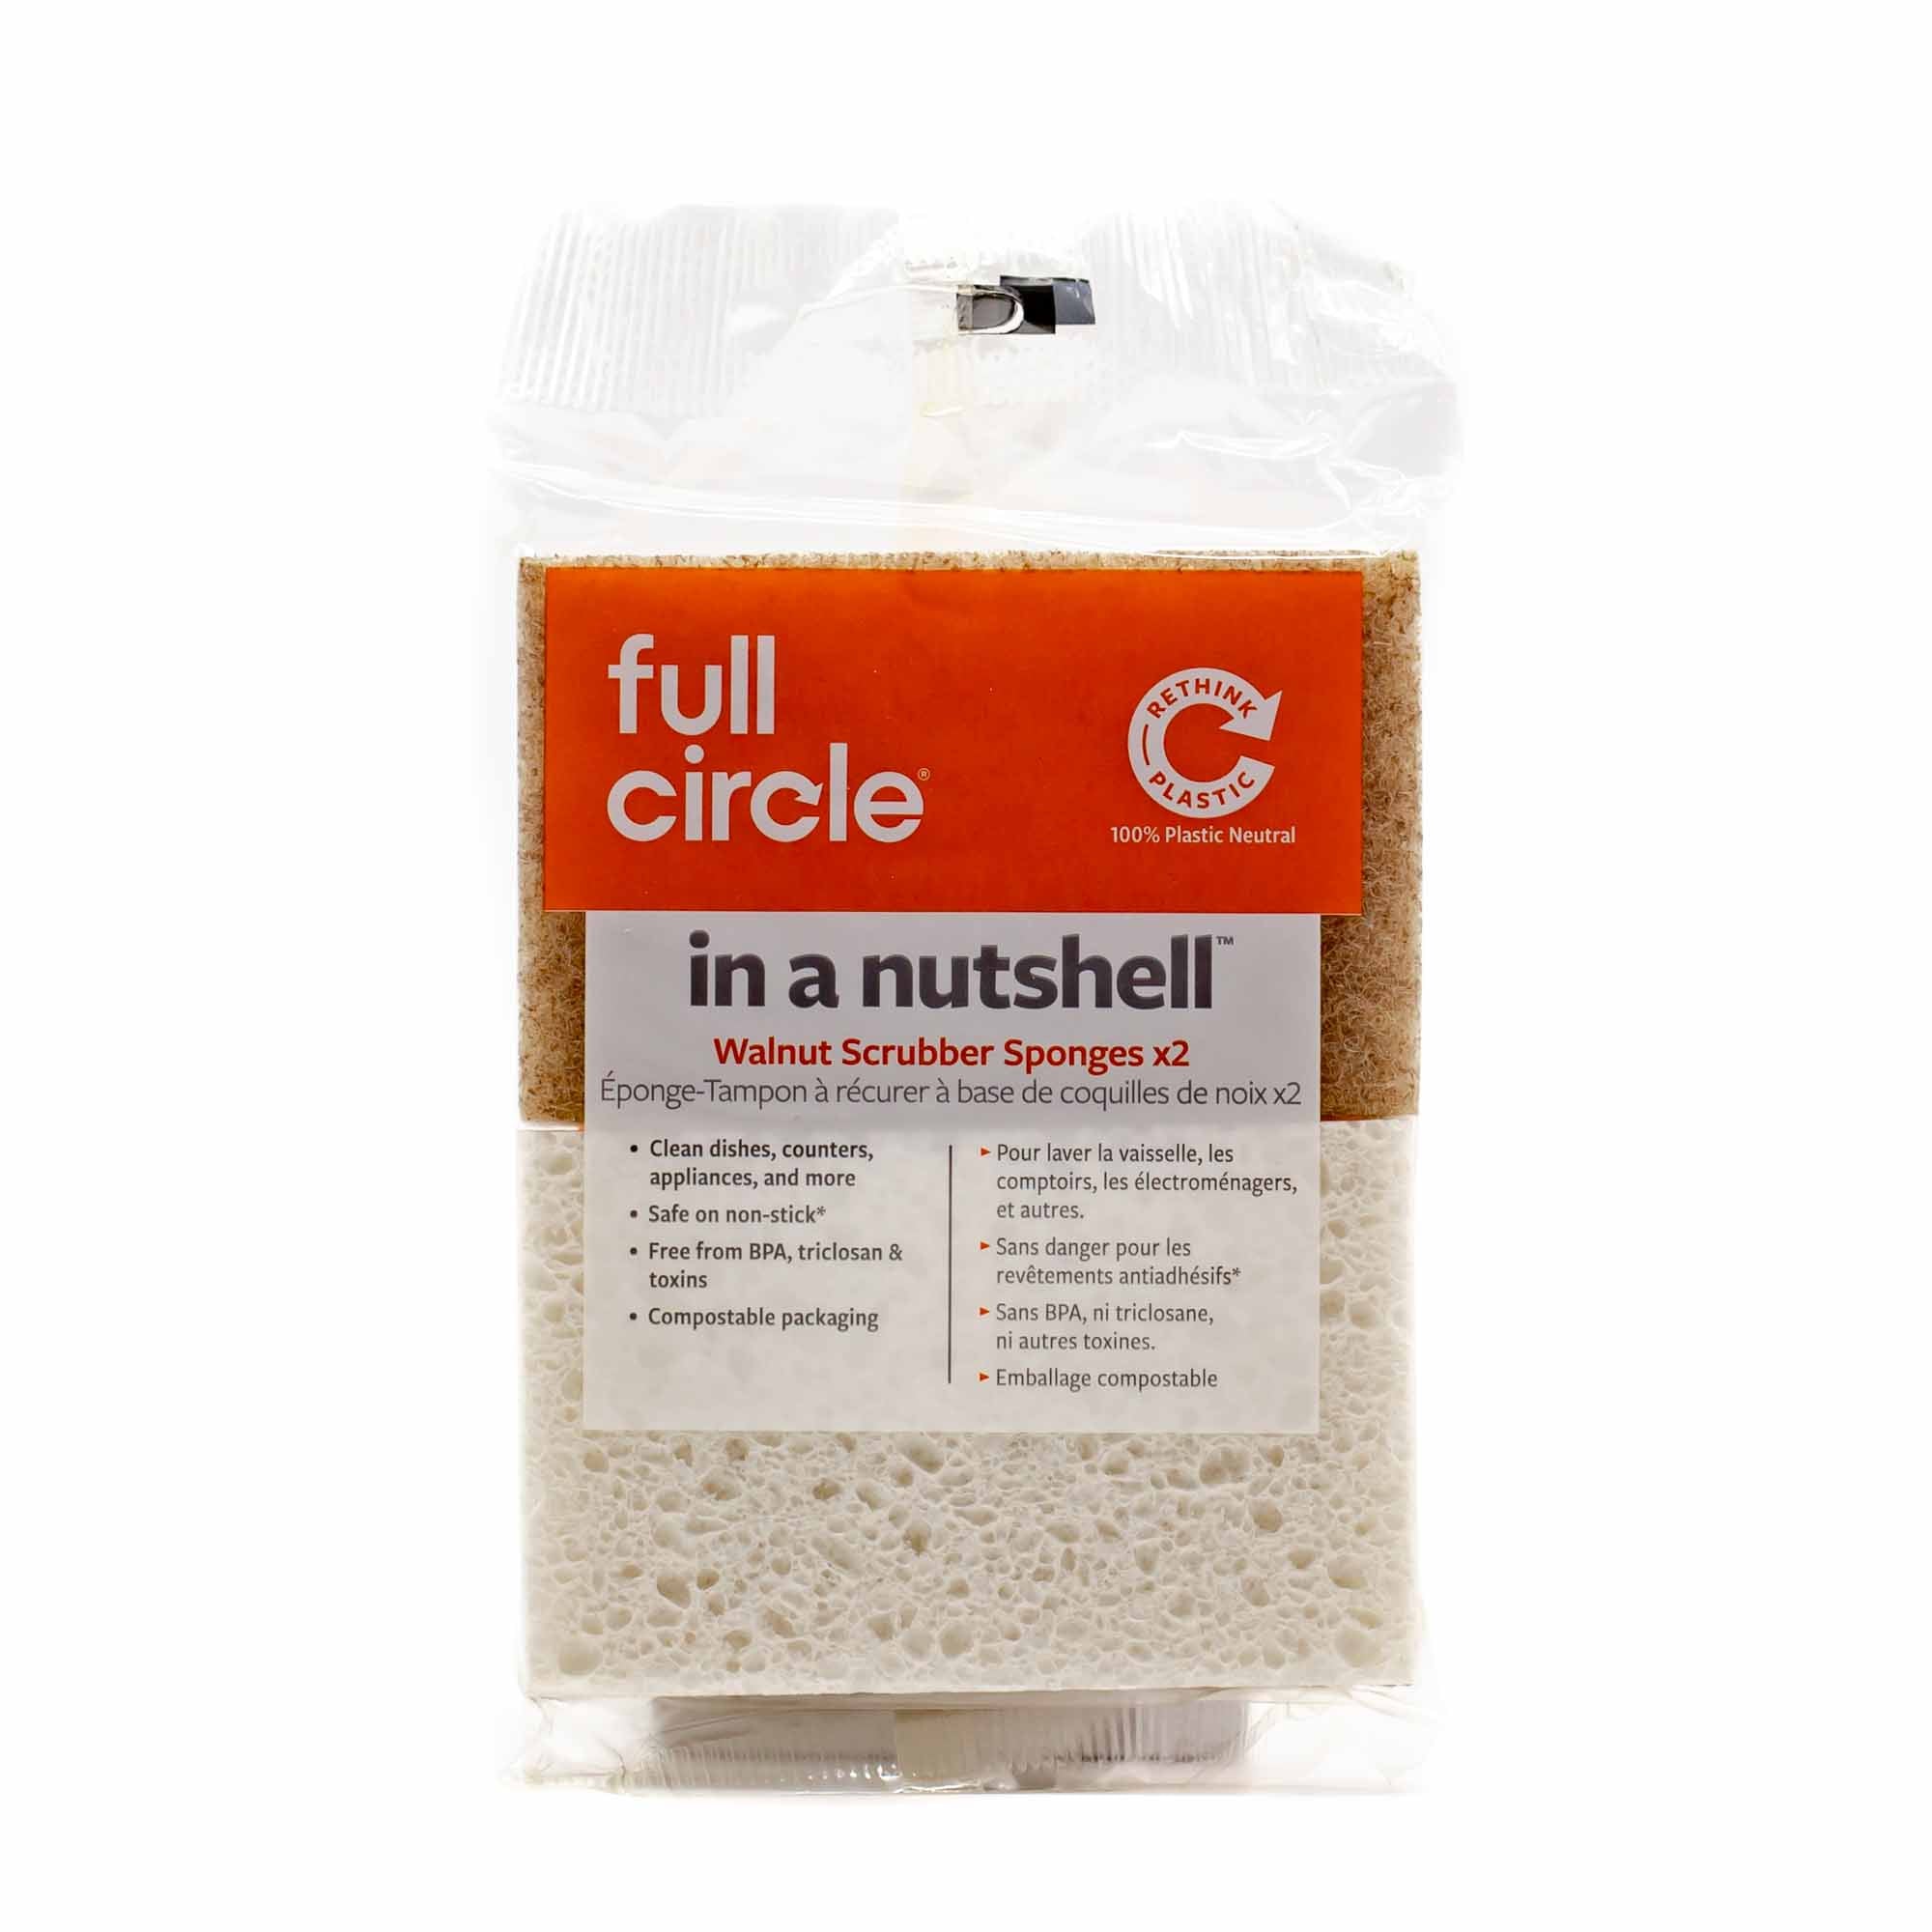 Full Circle "IN A NUTSHELL" Scrubbing Sponges - Mortise And Tenon